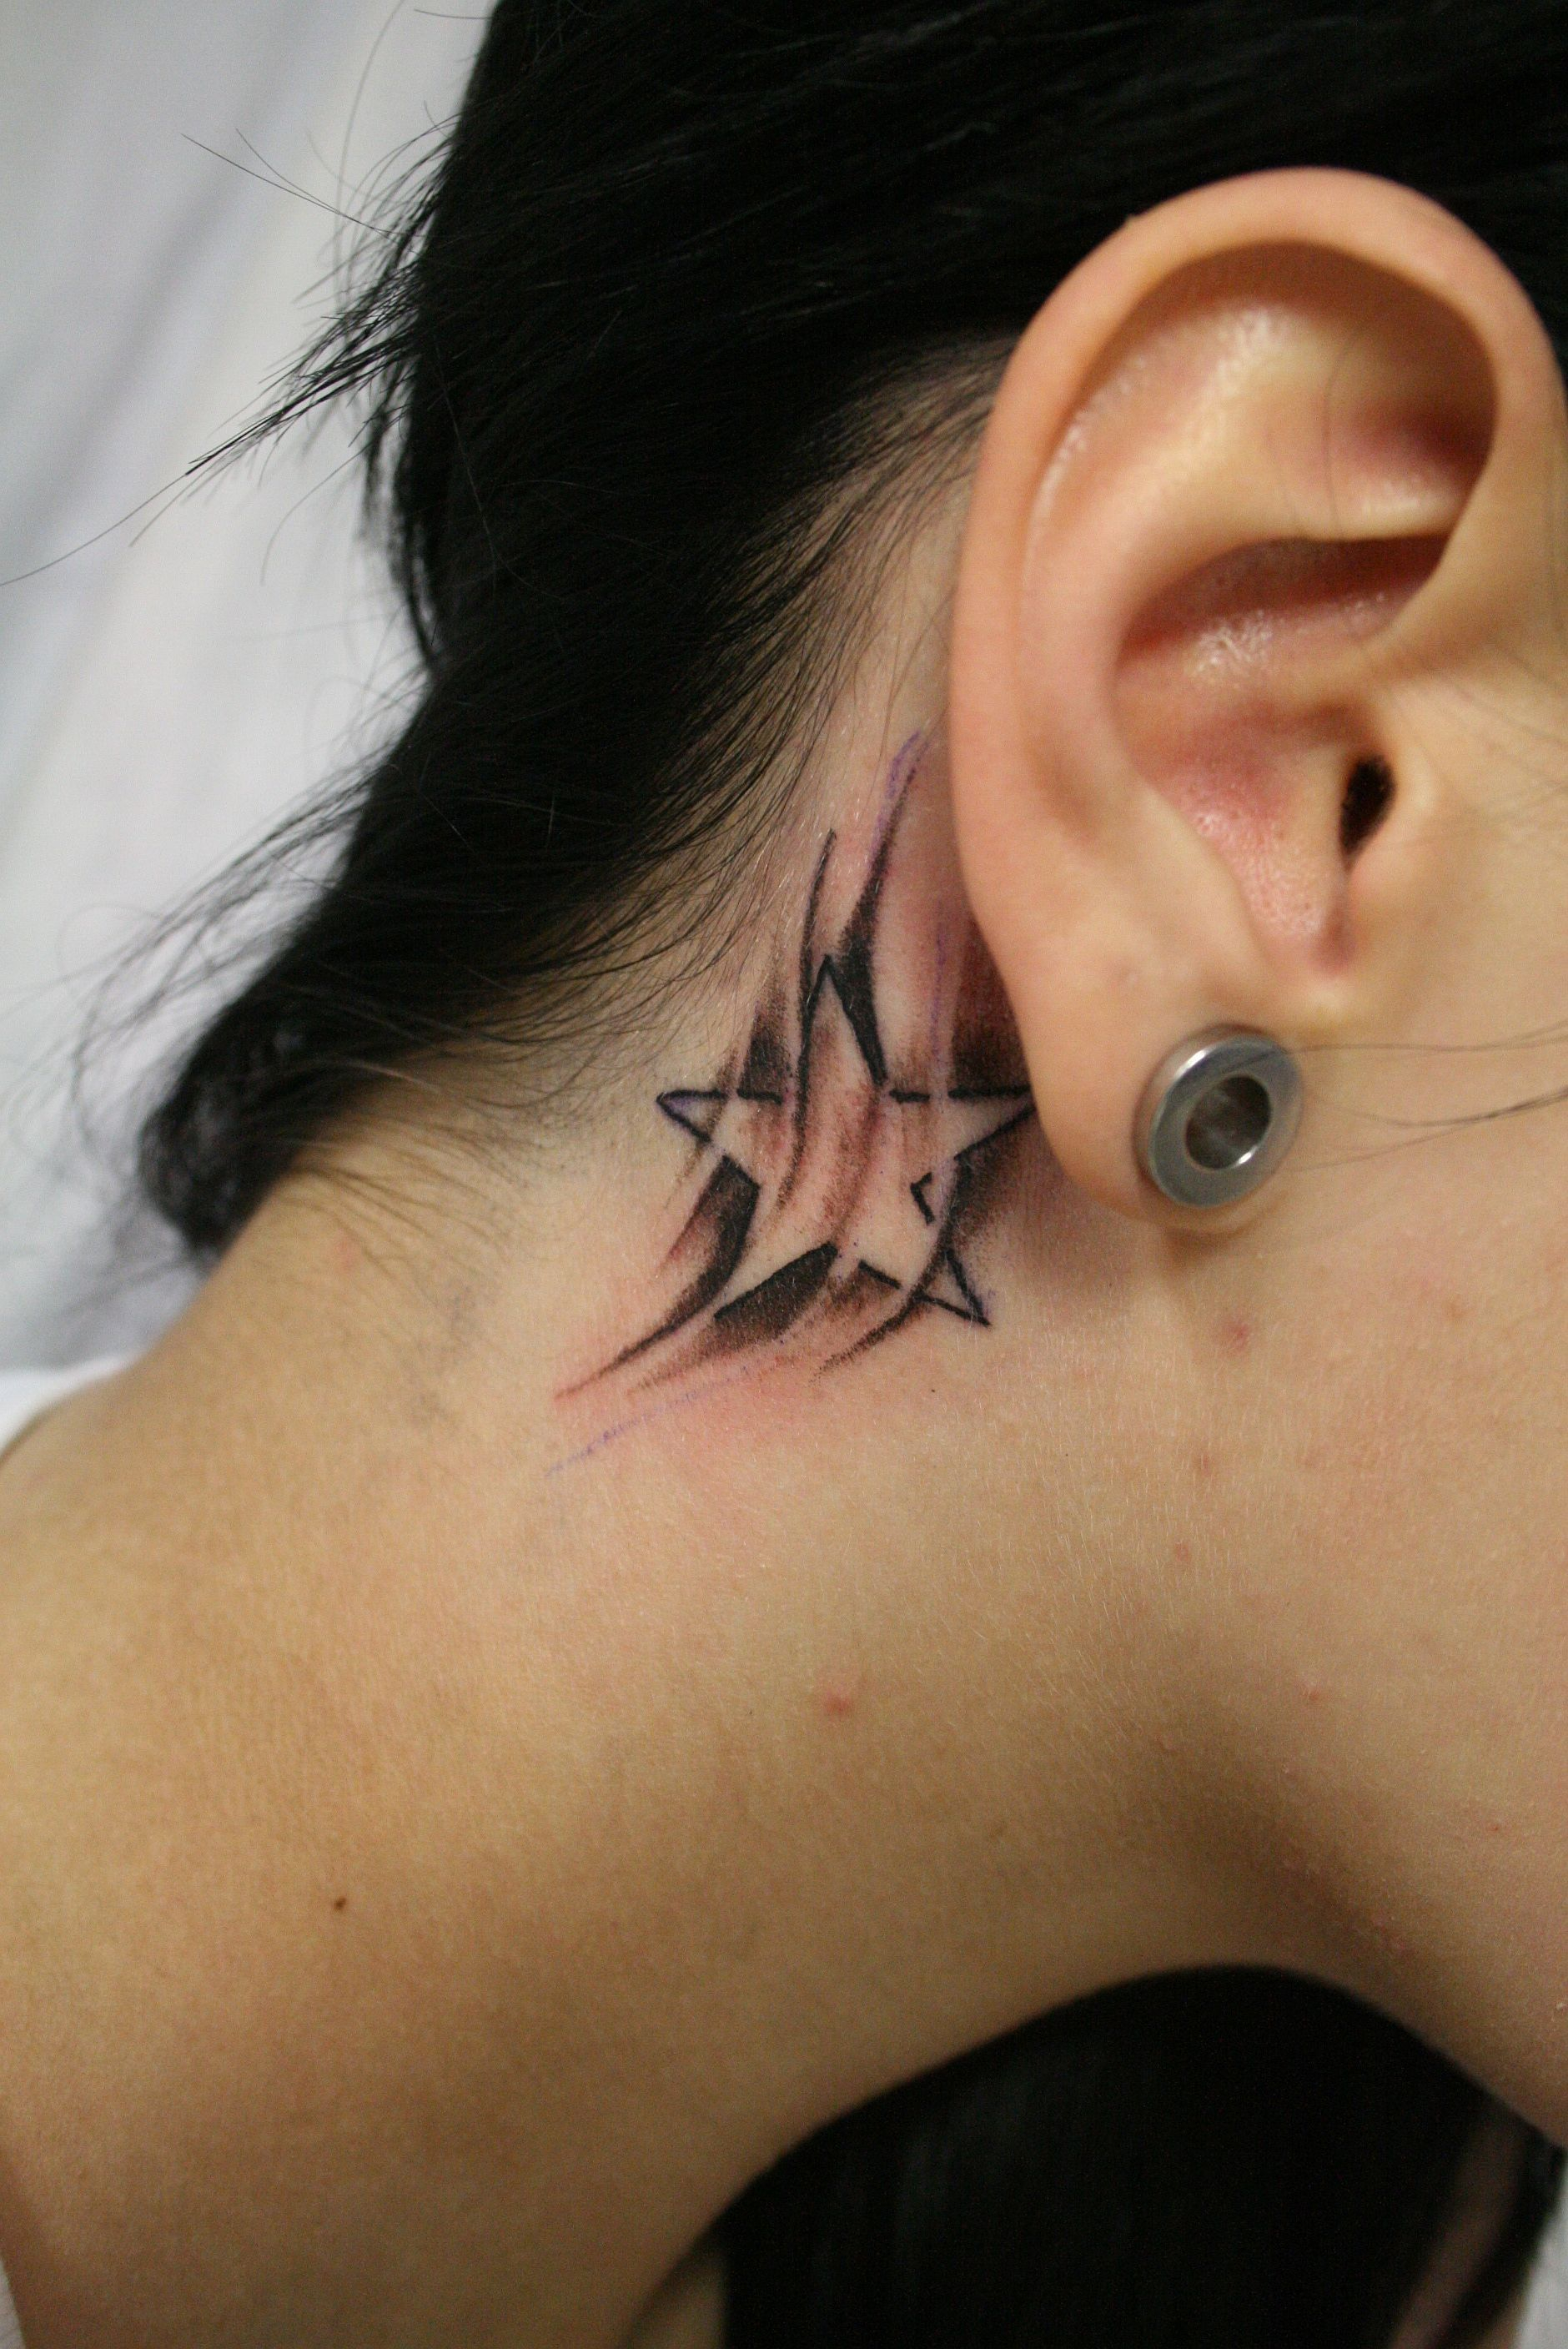 Astonishing Behind Ear Butterfly Tattoos Amazing Tattoo Design in sizing 1880 X 2816